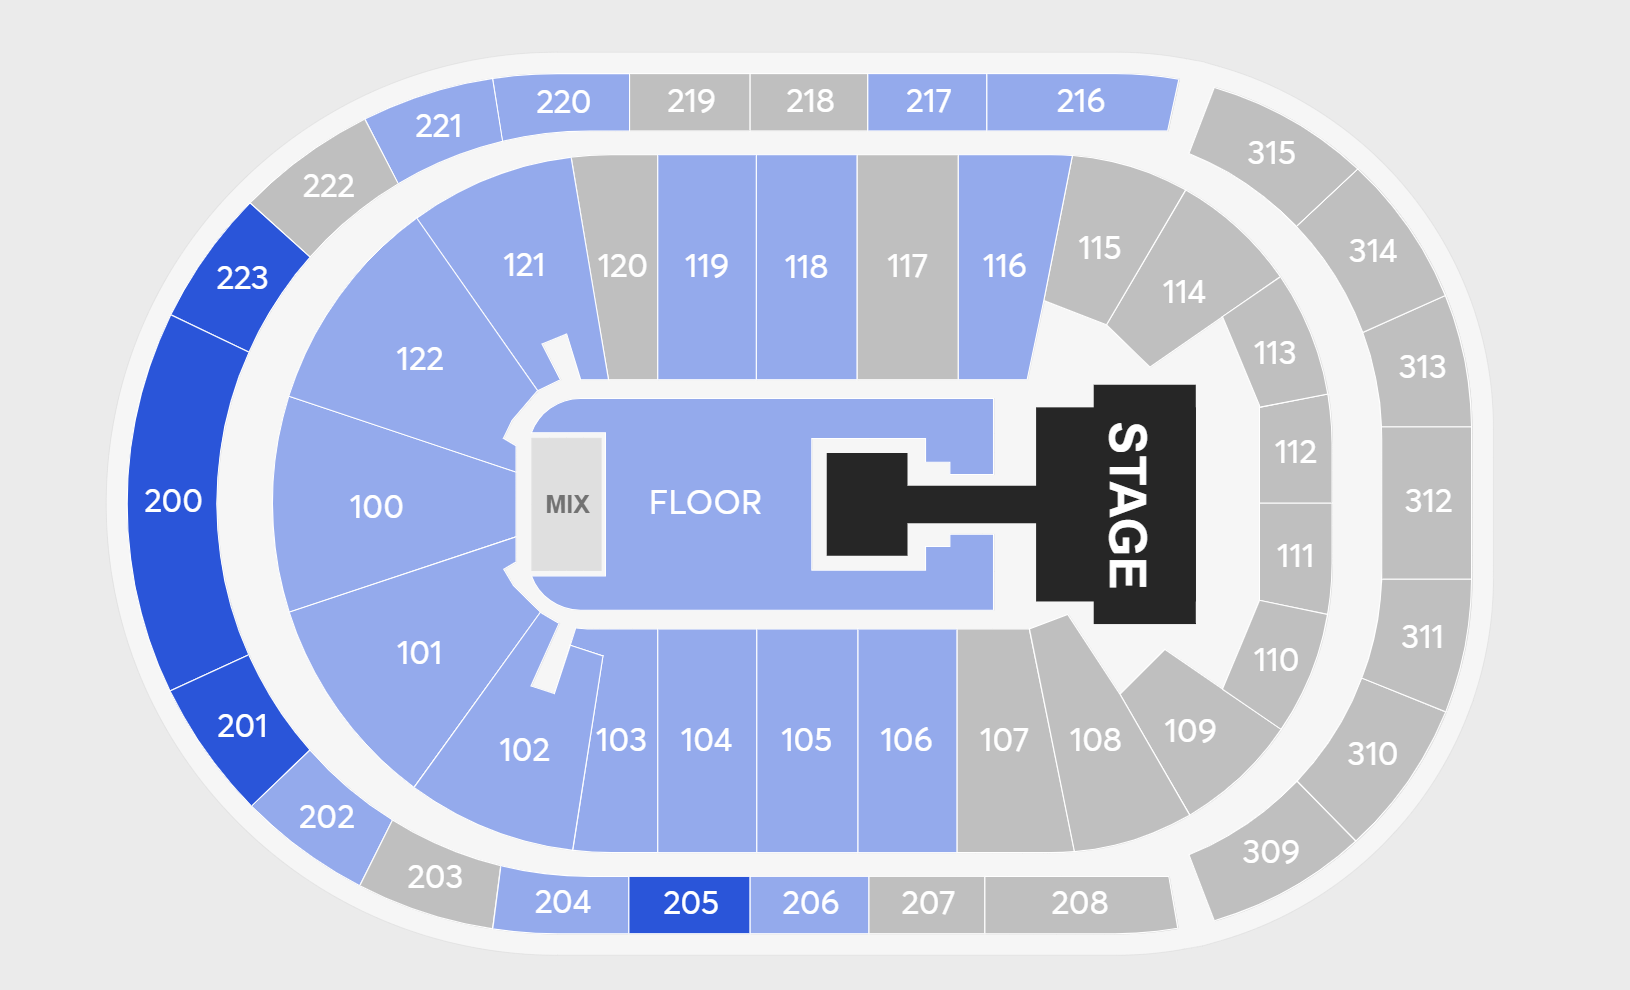 Fans will need a presale code for floor seating, but there are some Official Platinum seats available